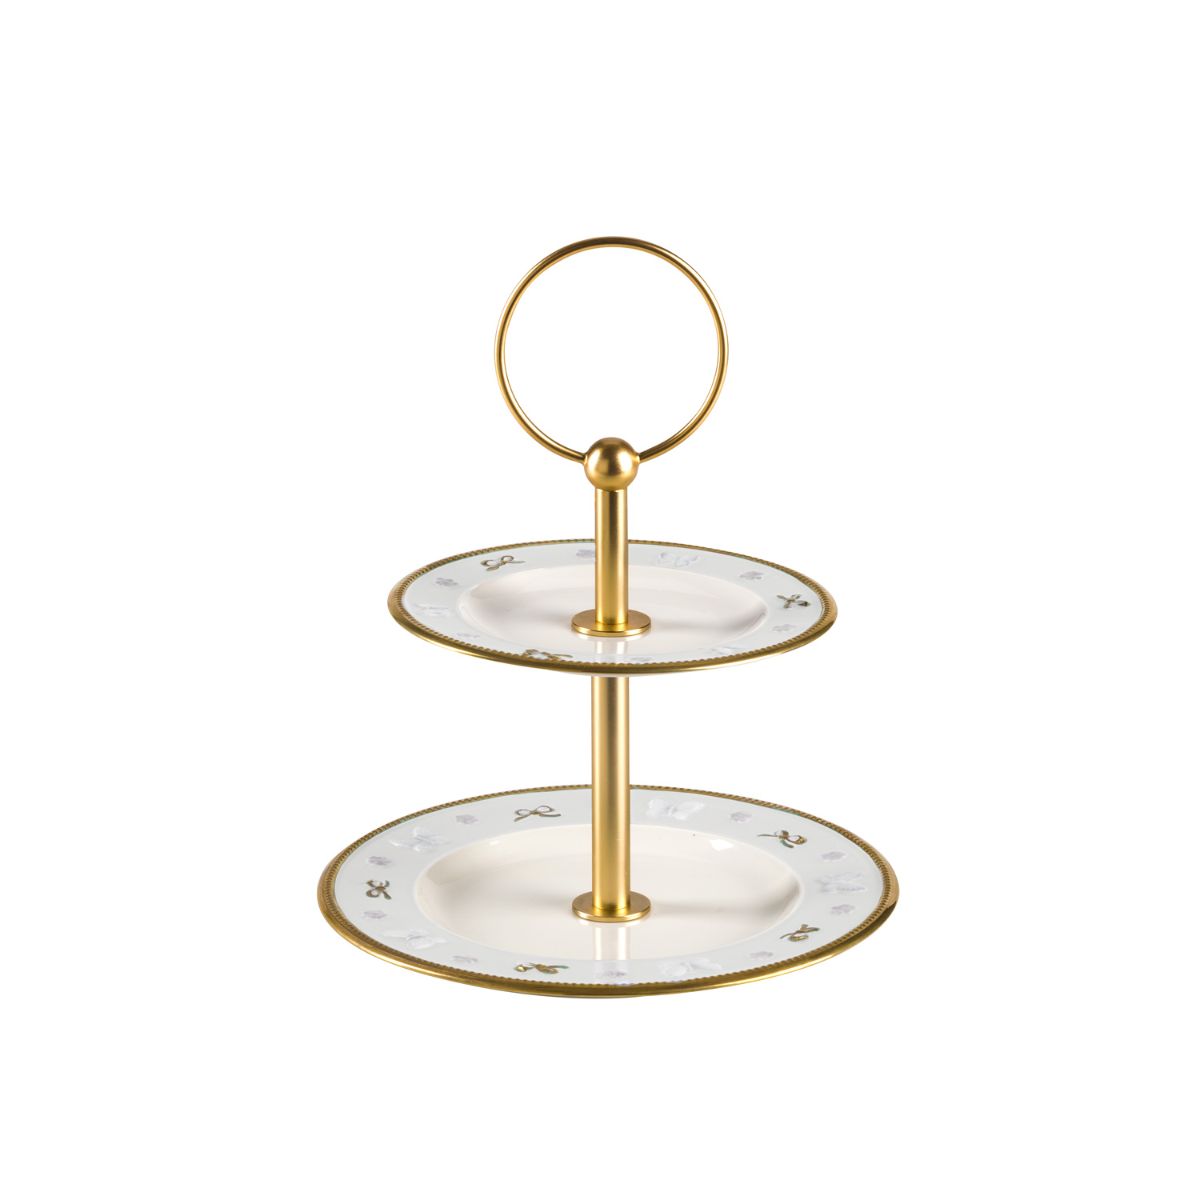 Butterfly White & Gold 2 Tier Cake Stand